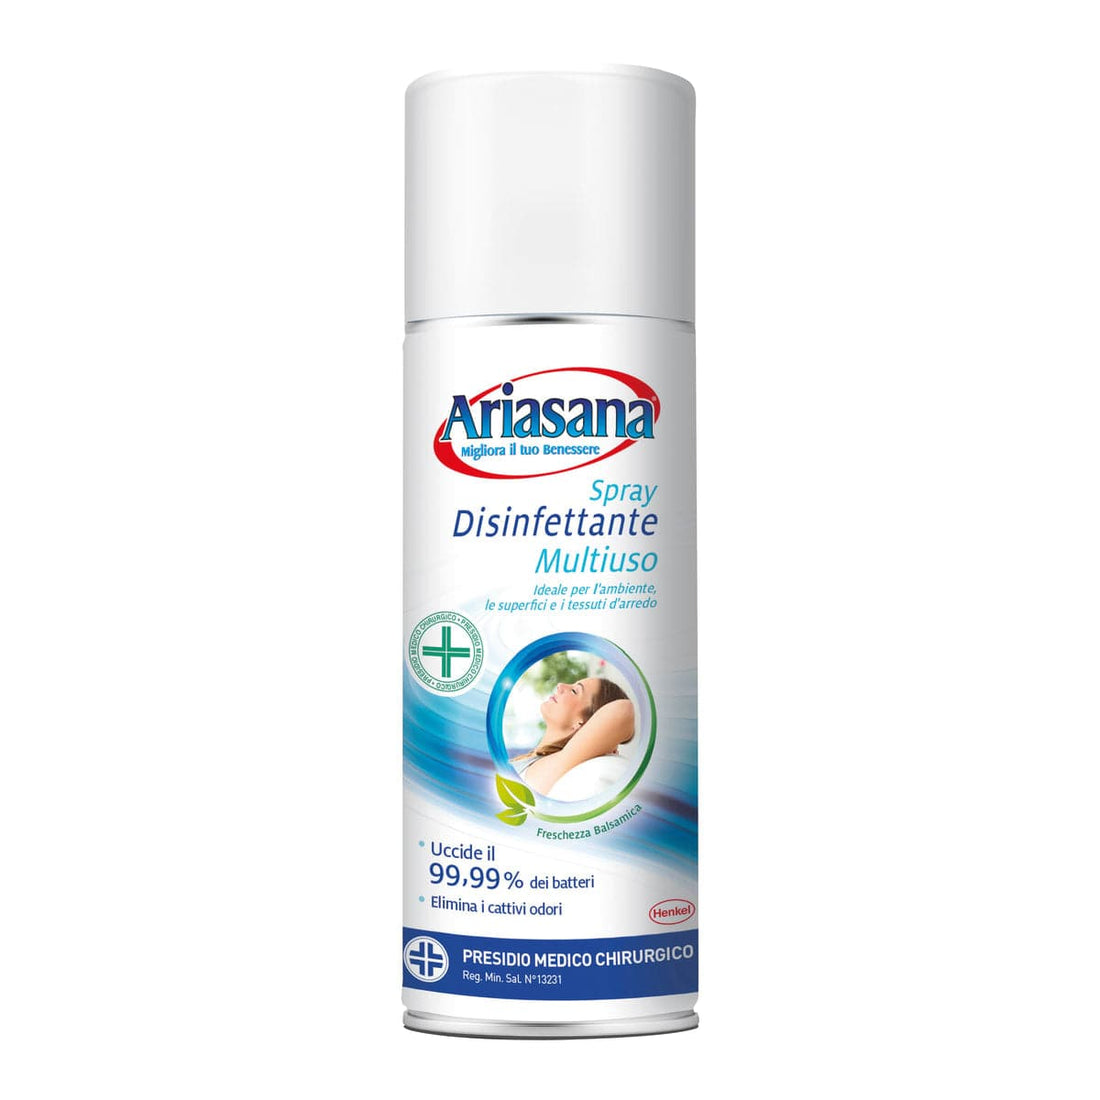 ARIASANA MULTI-PURPOSE DISINFECTANT AND SANITISING SPRAY 150ML SURGICAL MEDICAL DEVICE - best price from Maltashopper.com BR470003700